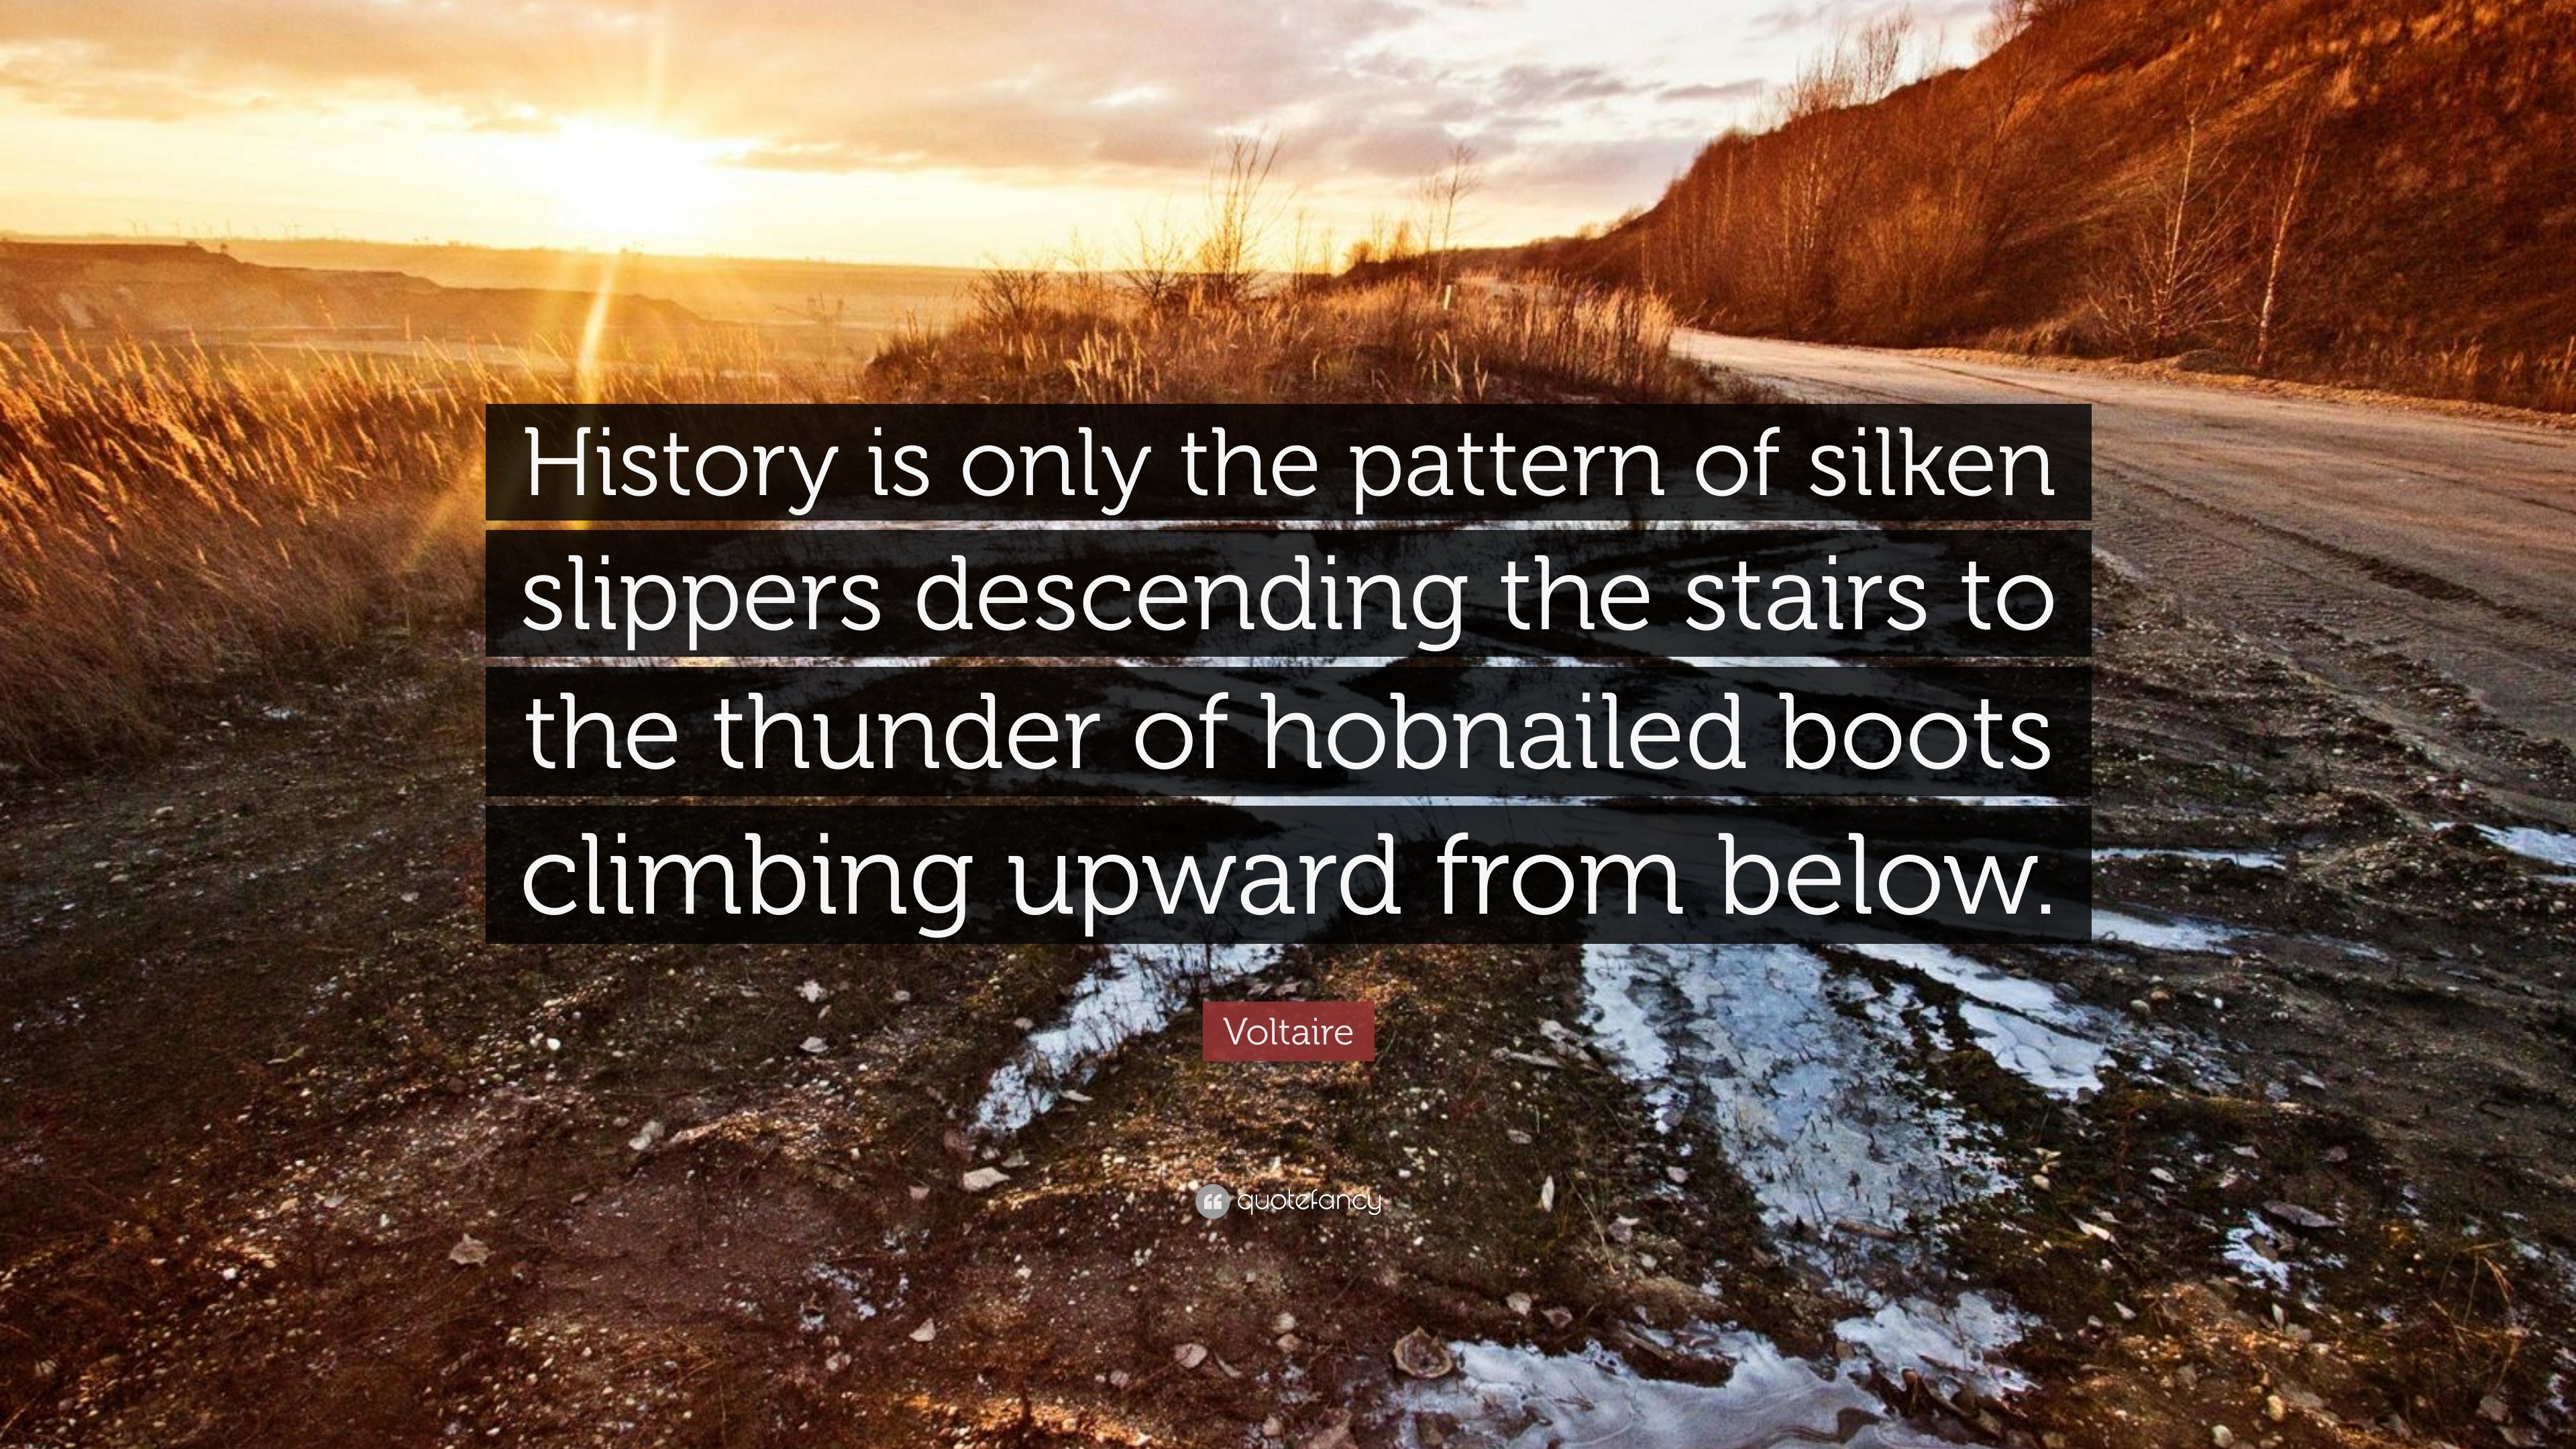 Voltaire Quote: “History is only the pattern of silken slippers descending the stairs to the thunder of hobnailed climbing upward f...”